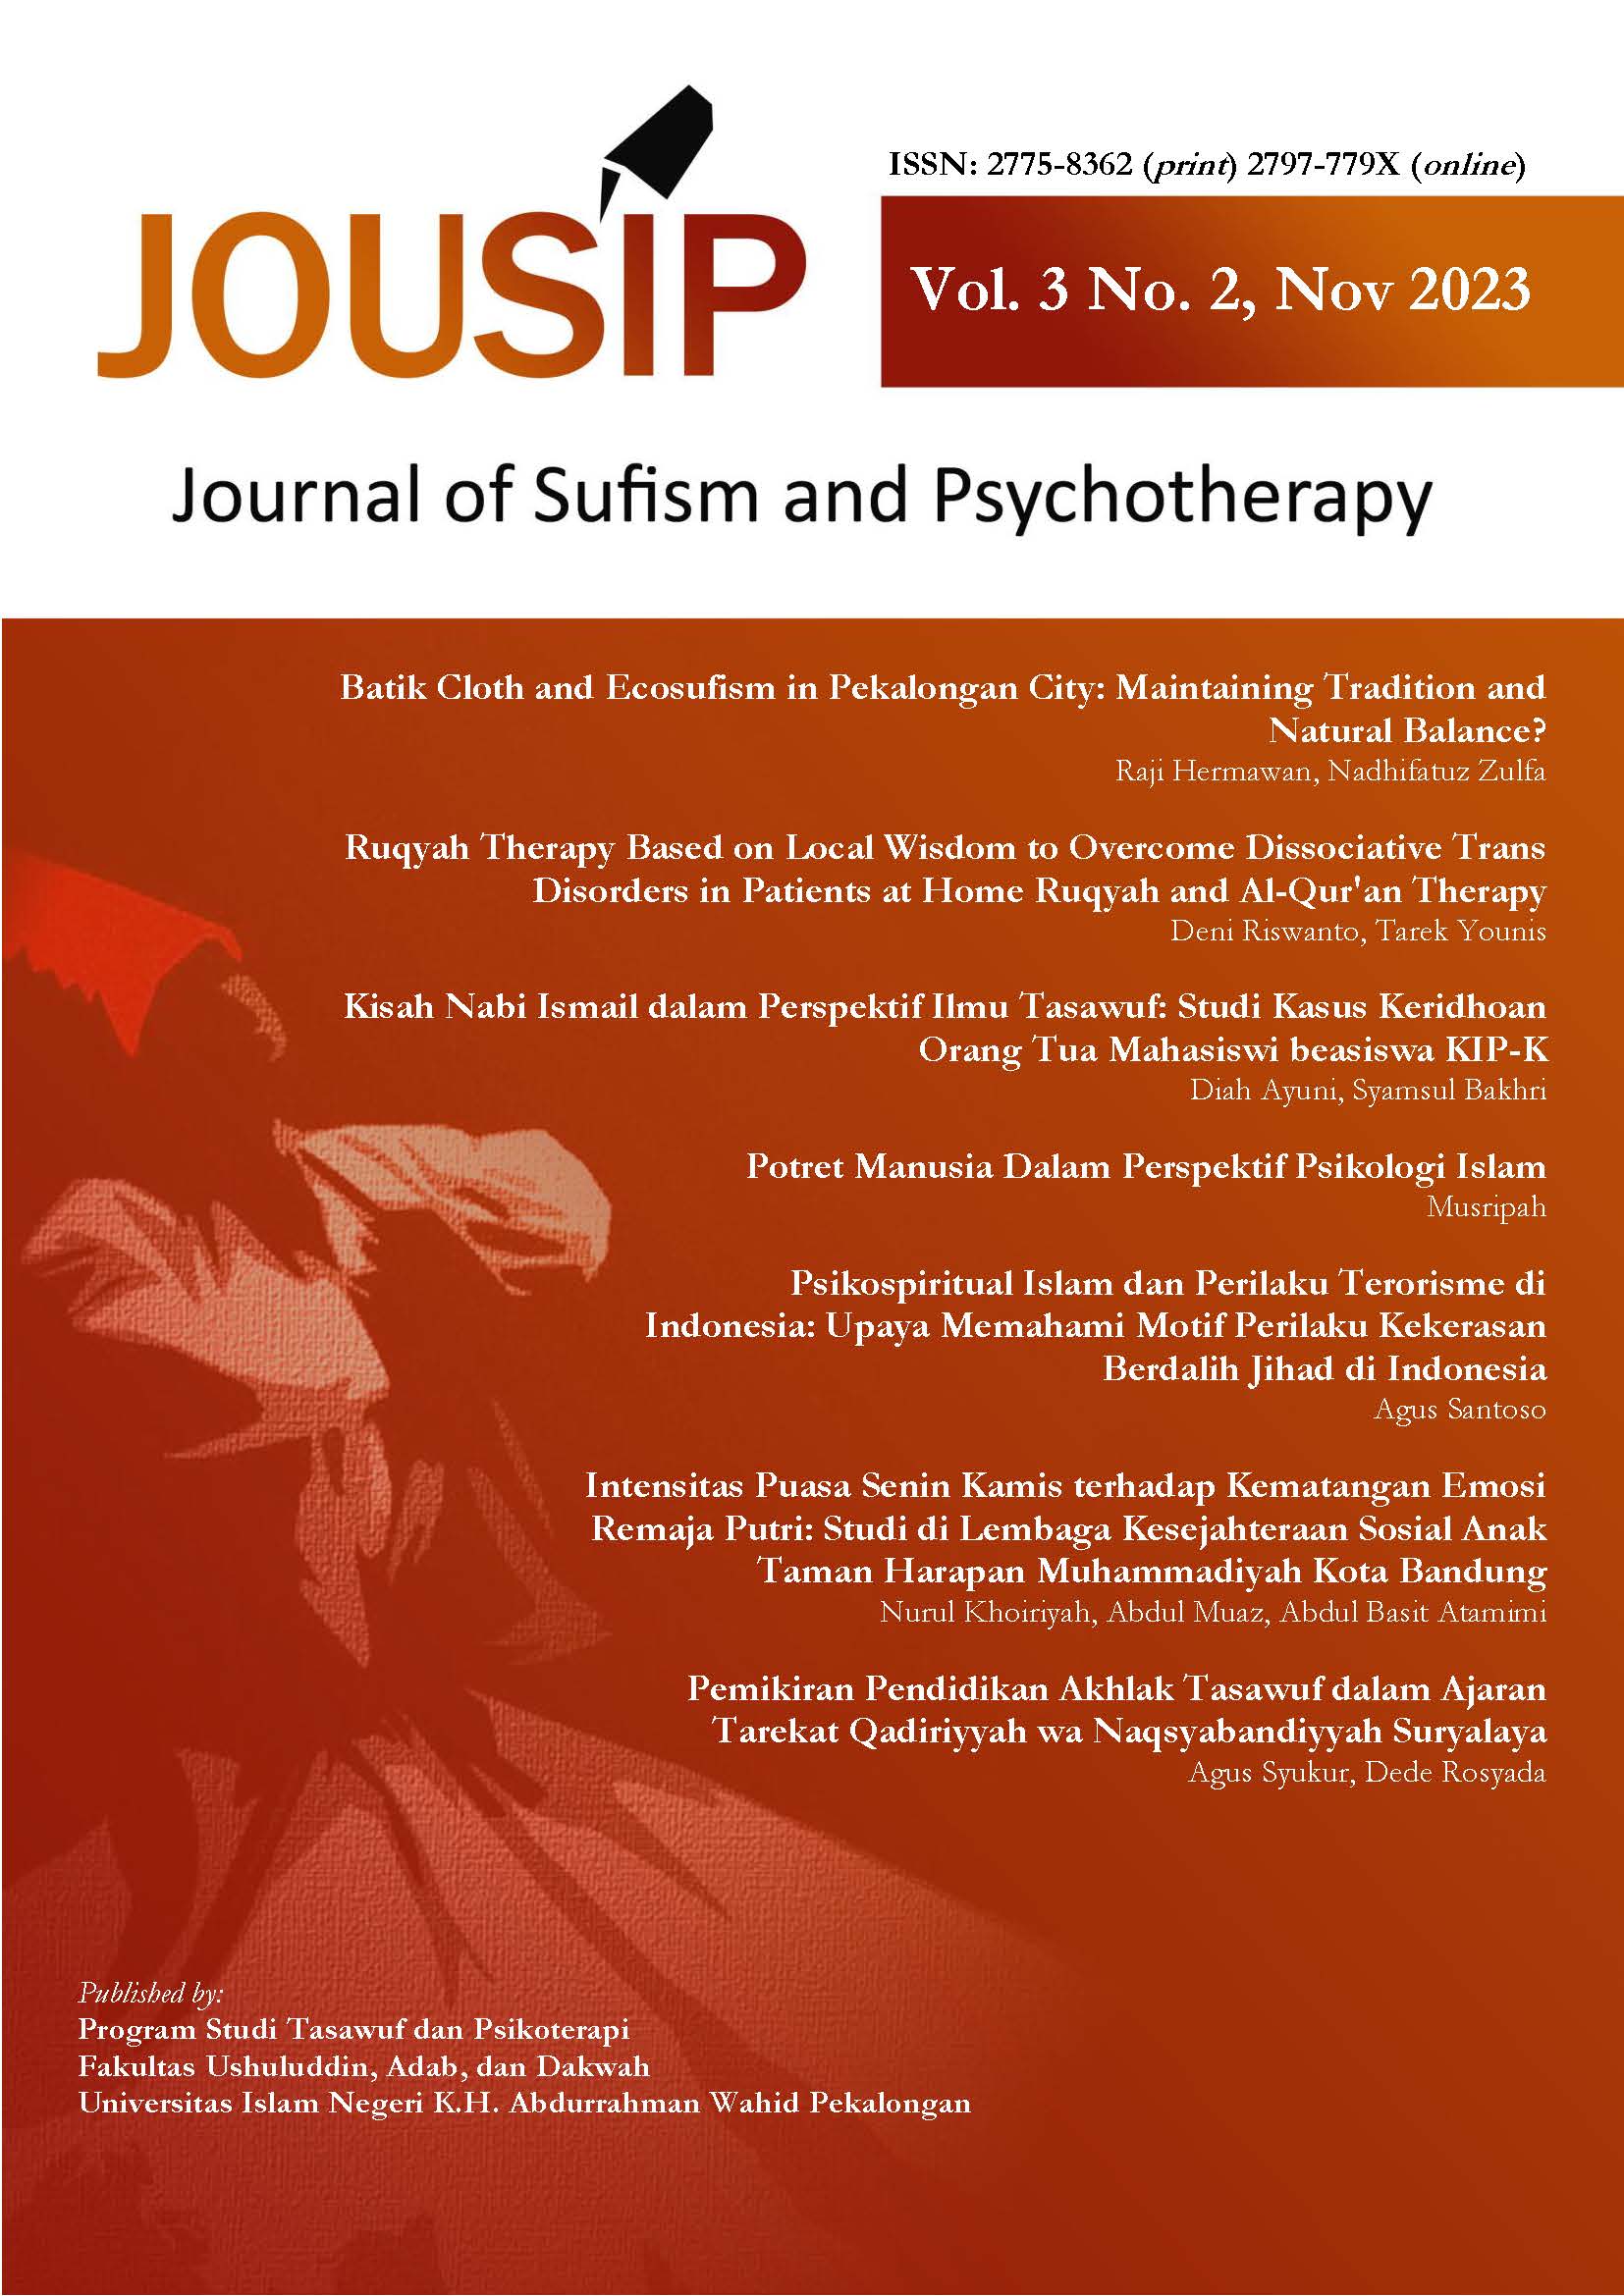 					View Vol. 3 No. 2 (2023): JOUSIP: Journal of Sufism and Psychotherapy, Vol. 3 No. 2, November 2023; Author Geographical: Indonesia, England, 
				